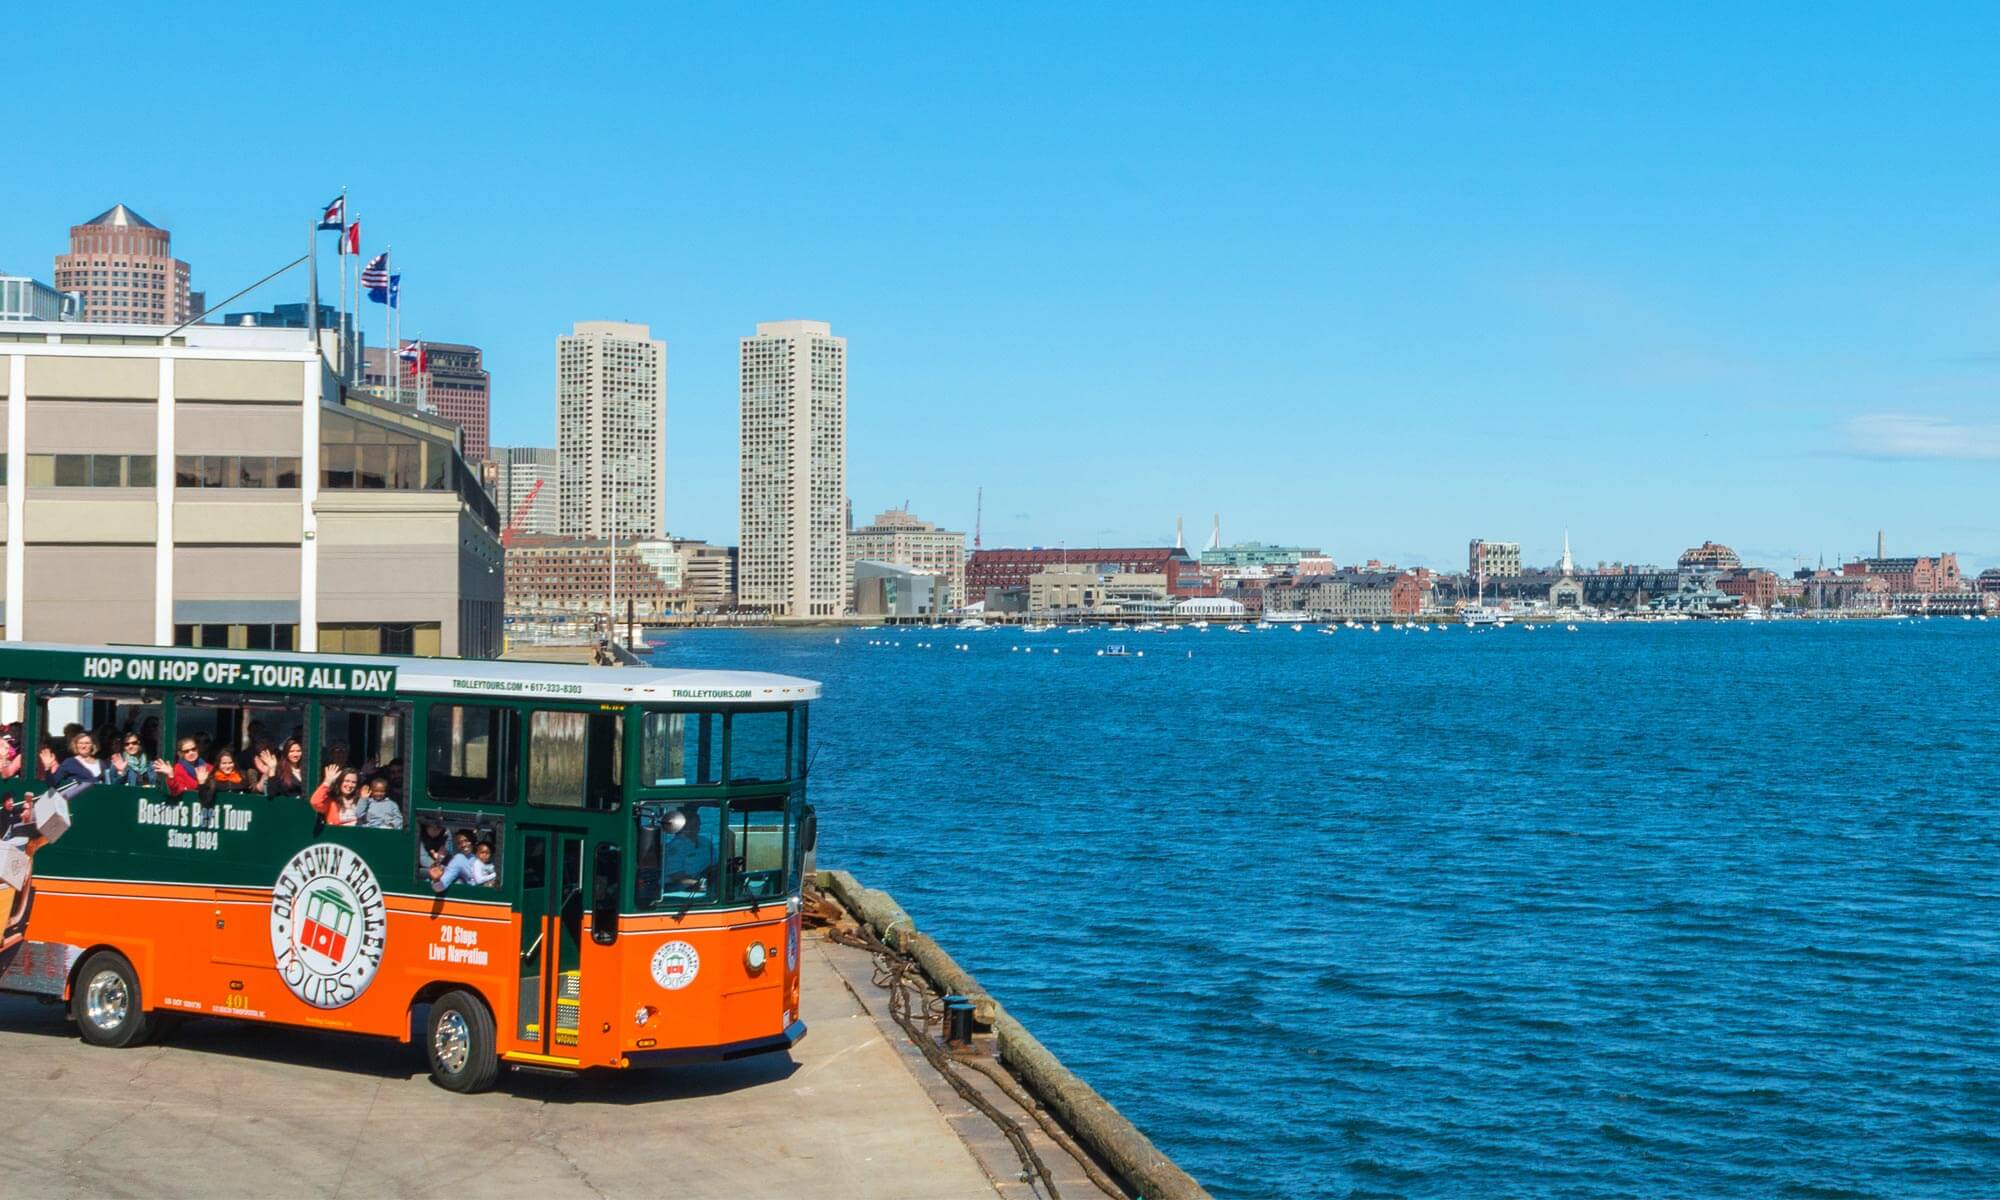 Old Town Trolley parked at the edge of the Boston Harbor